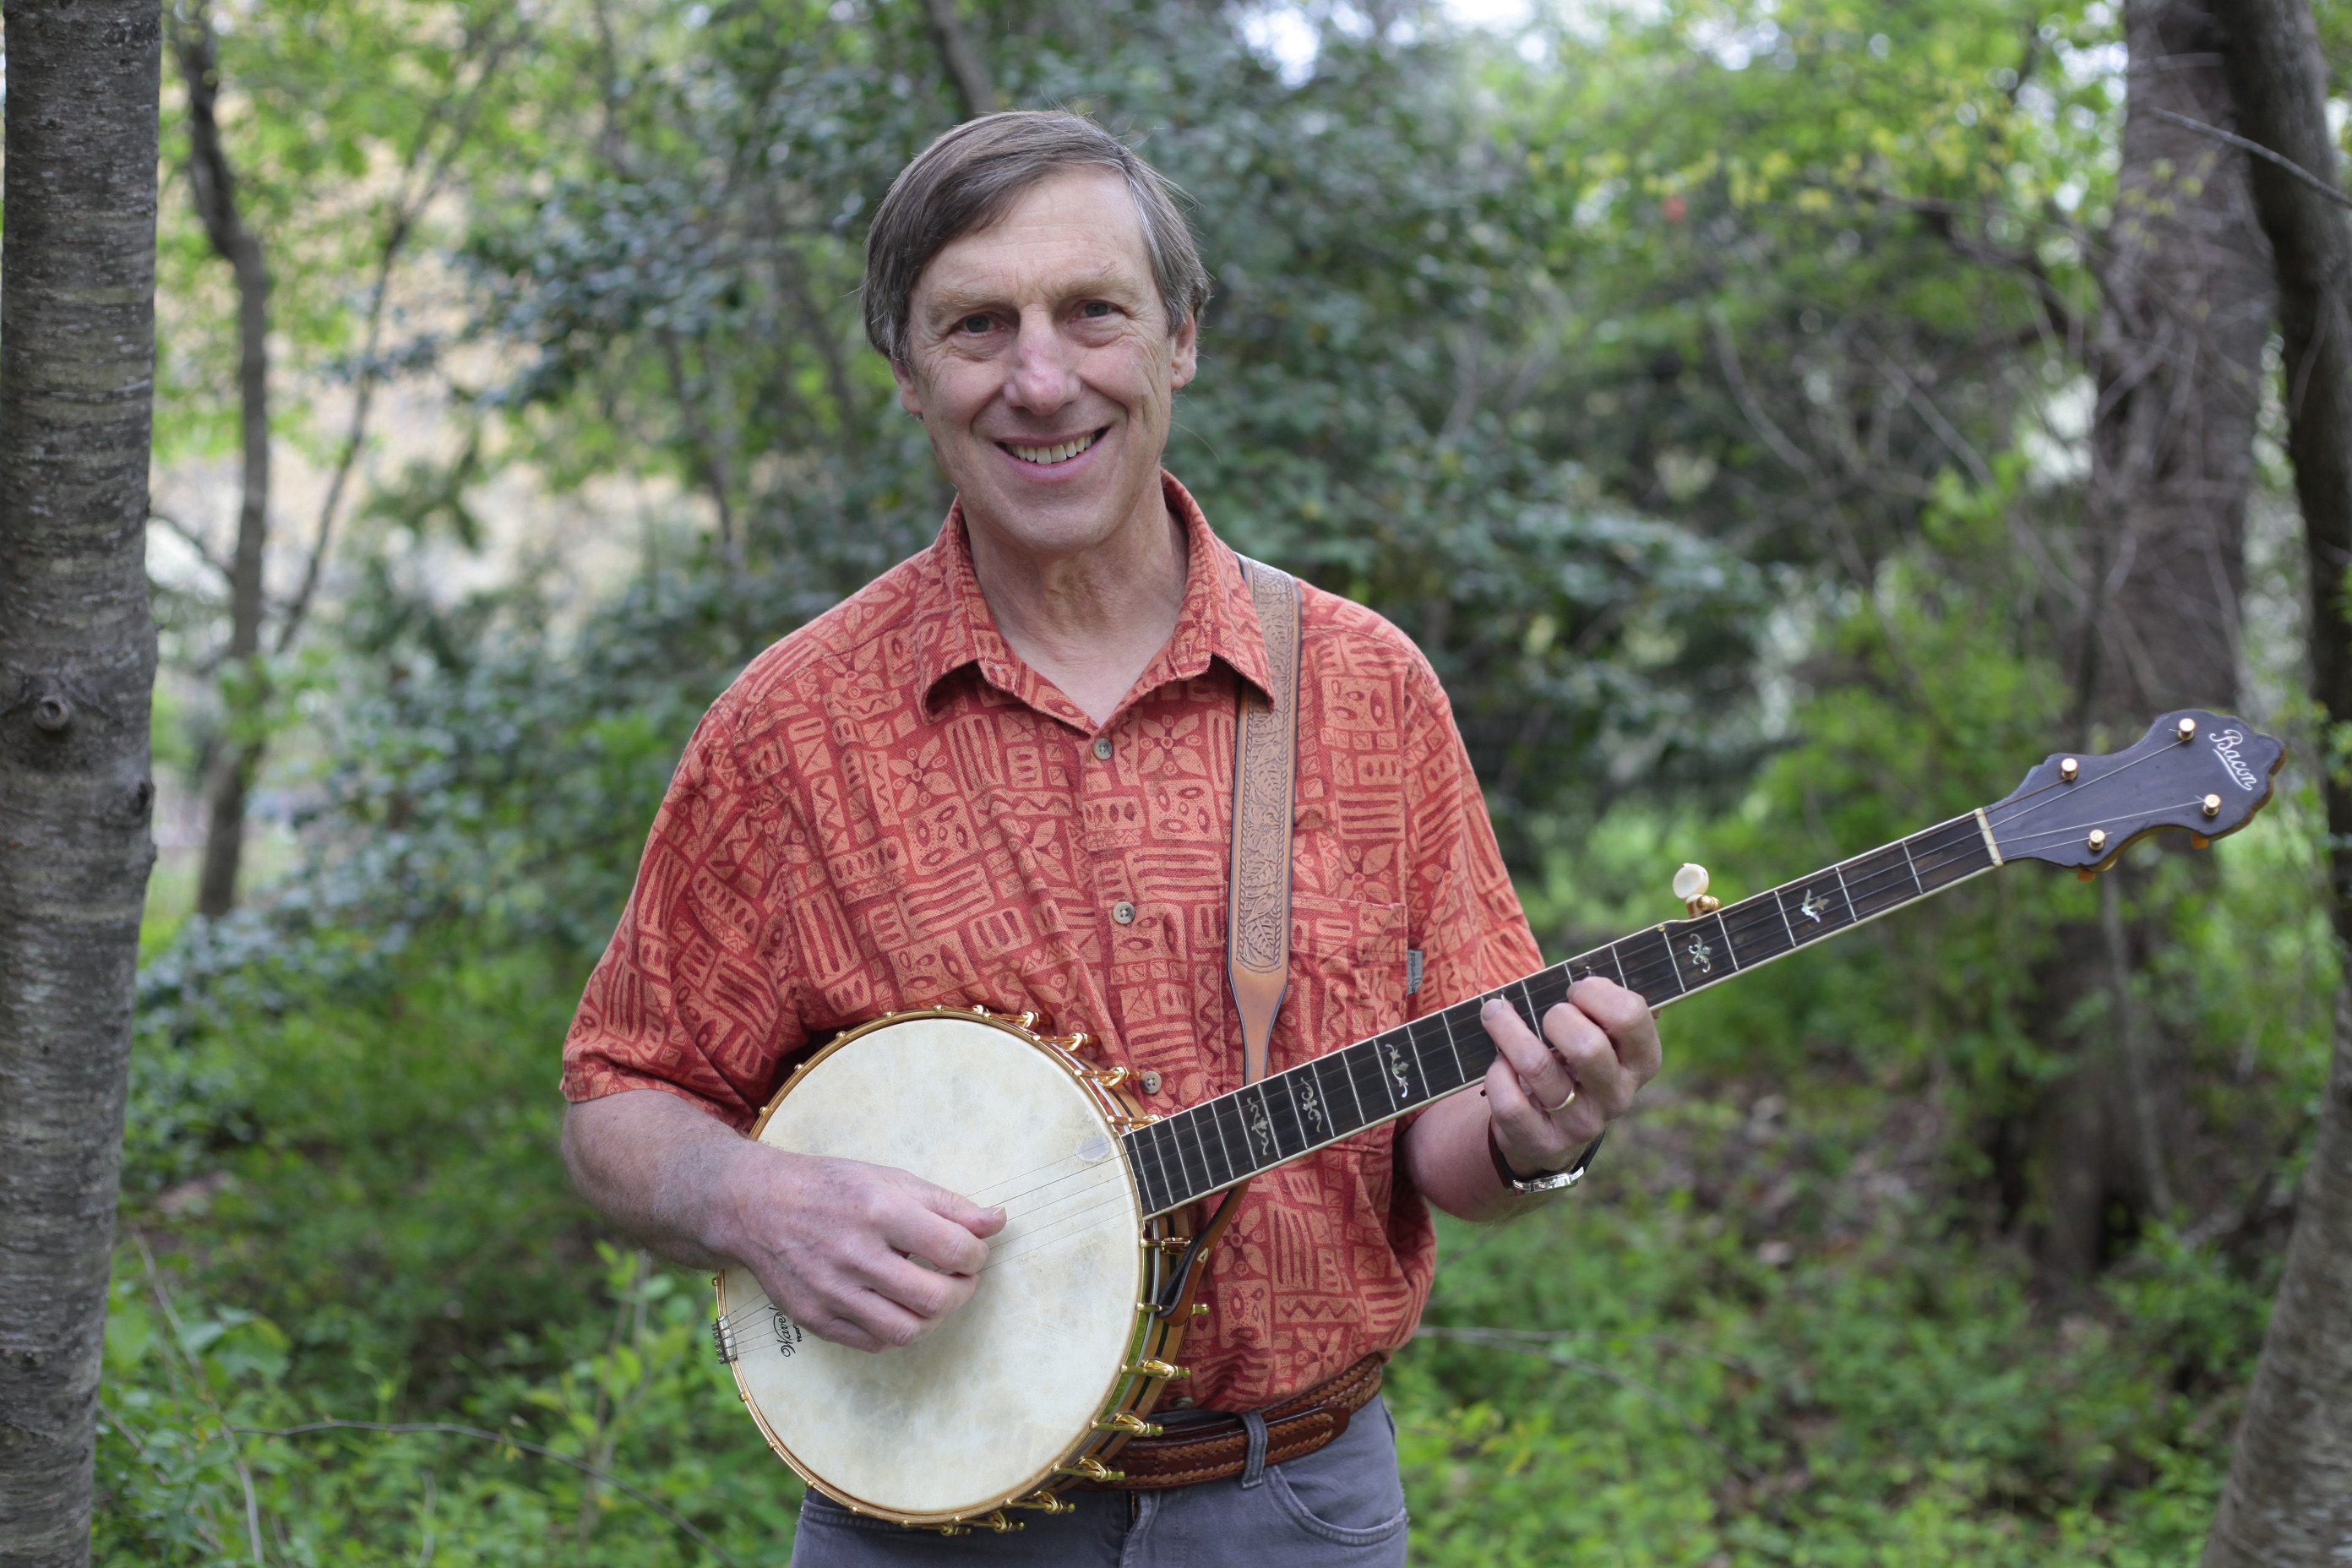 Wayne with banjo by Valerie Sauers